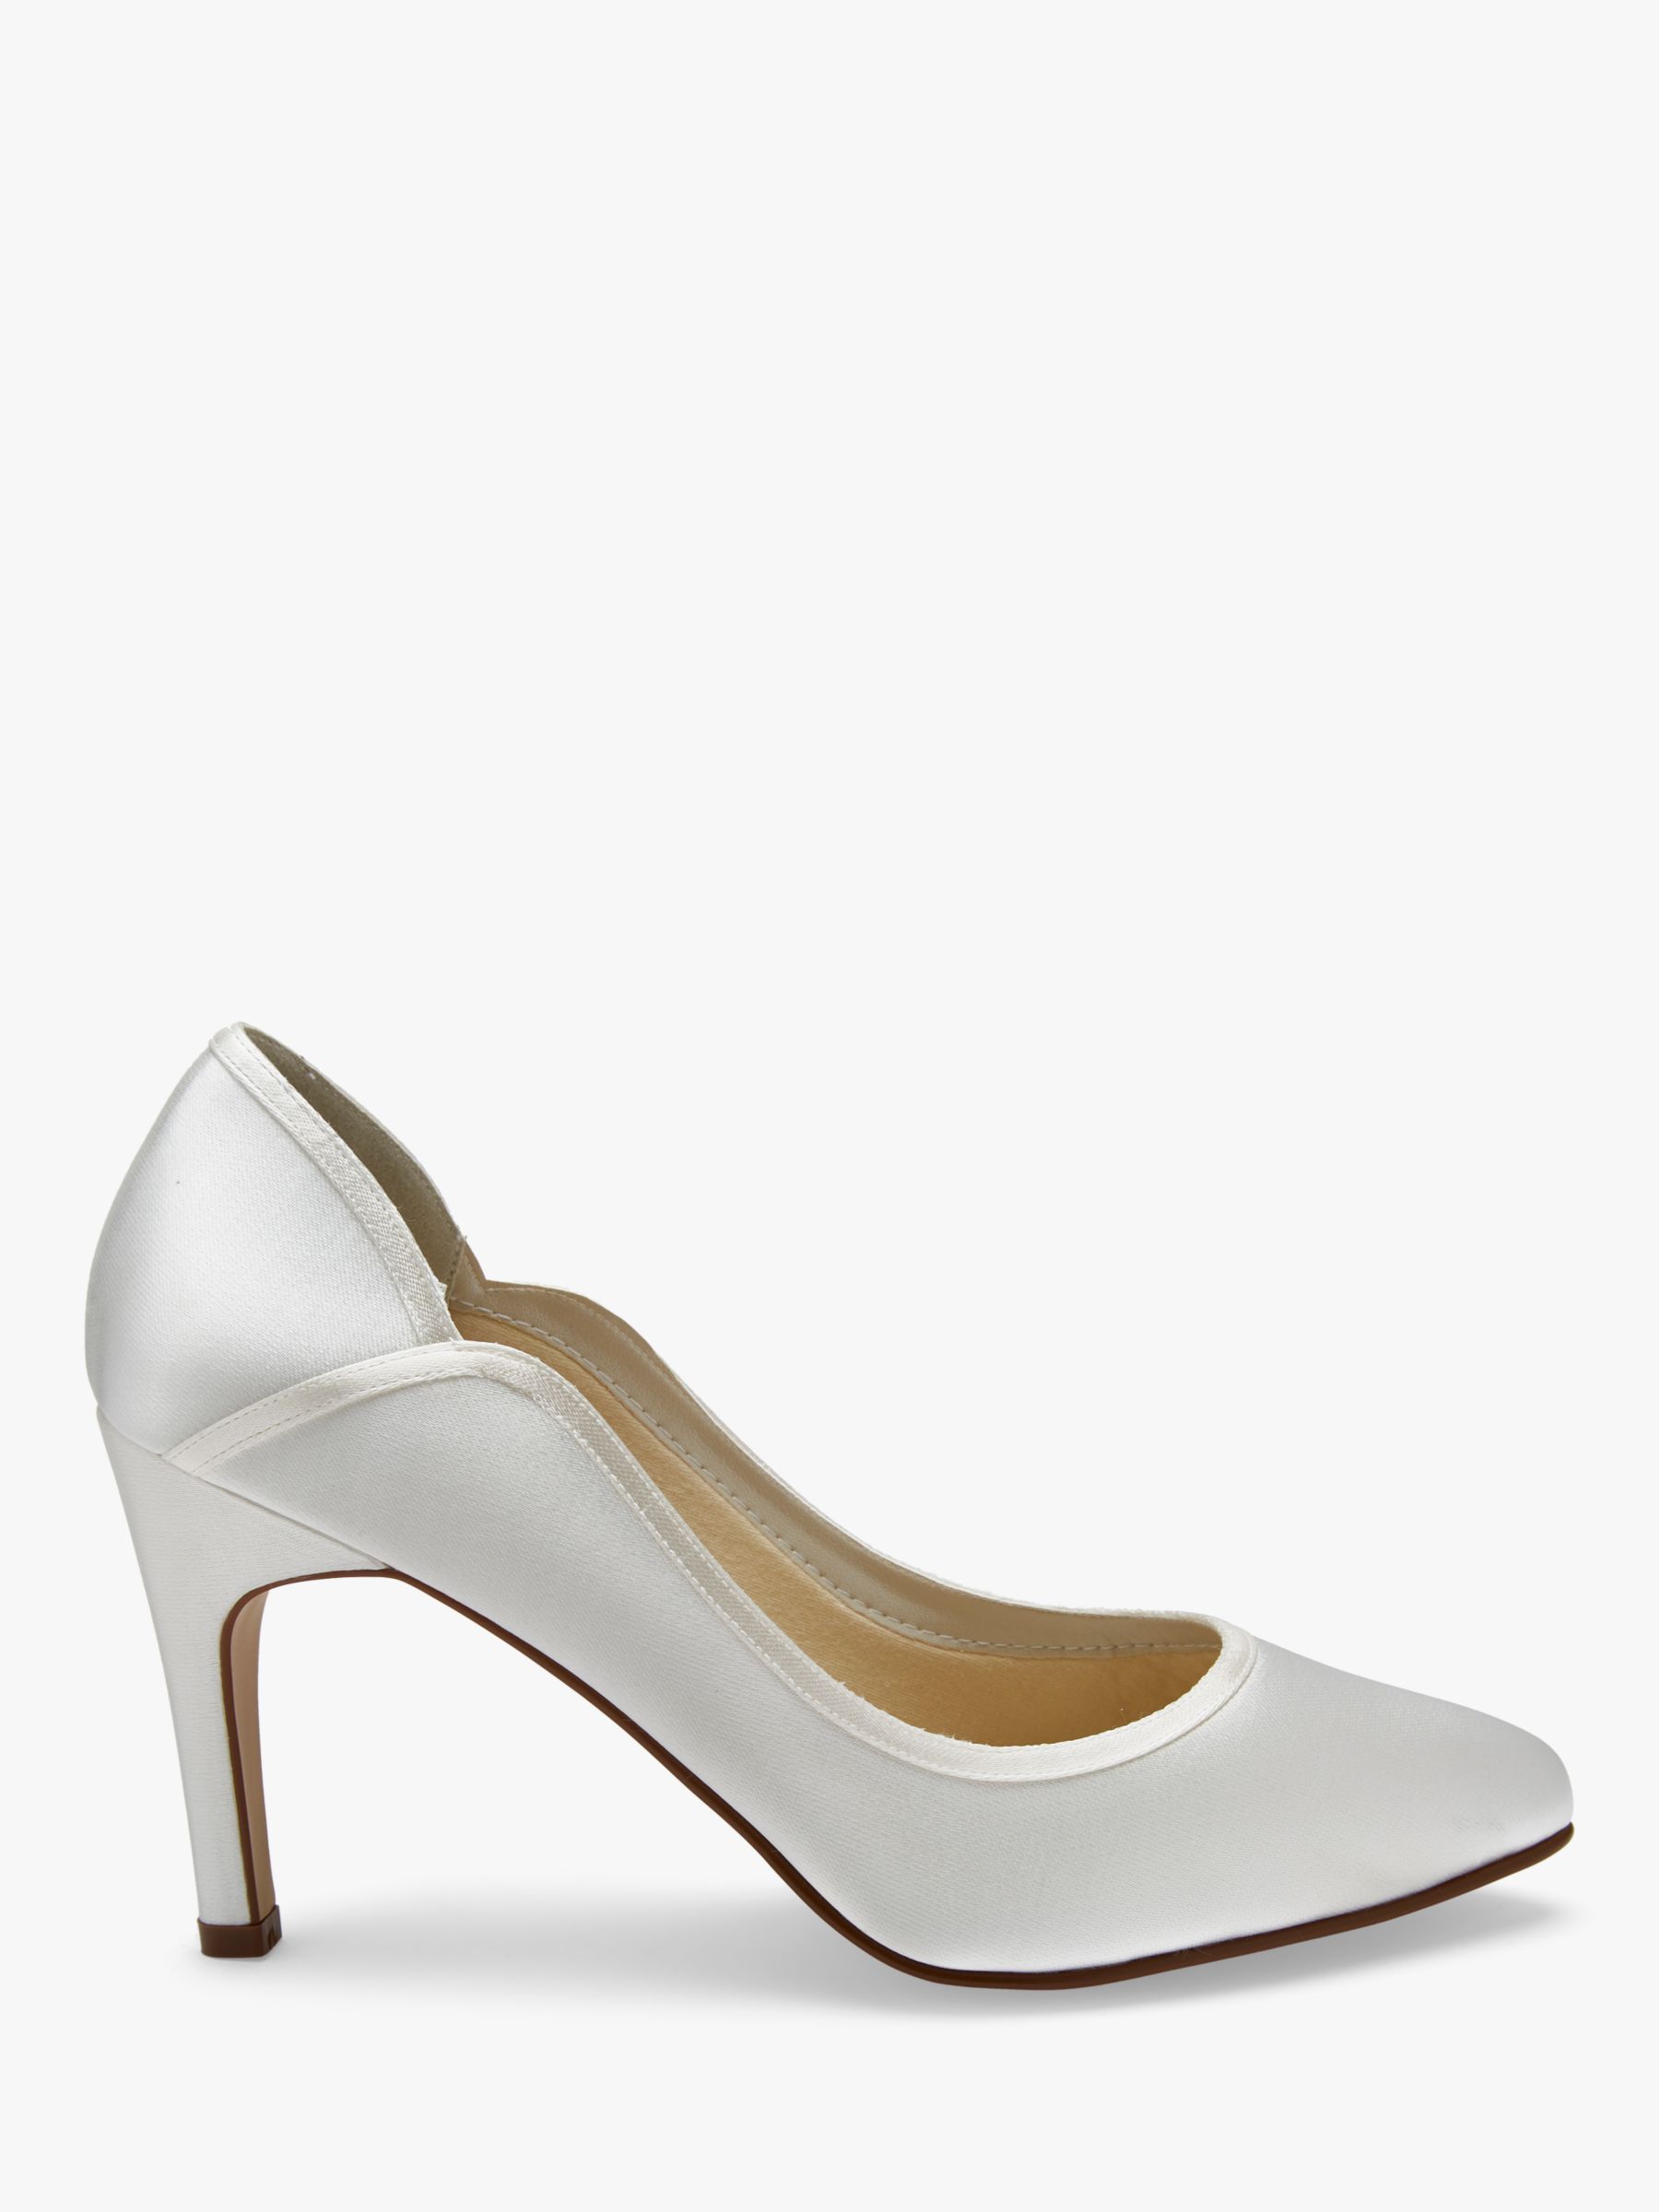 Rainbow Club Lucy Satin Court Shoes at John Lewis & Partners